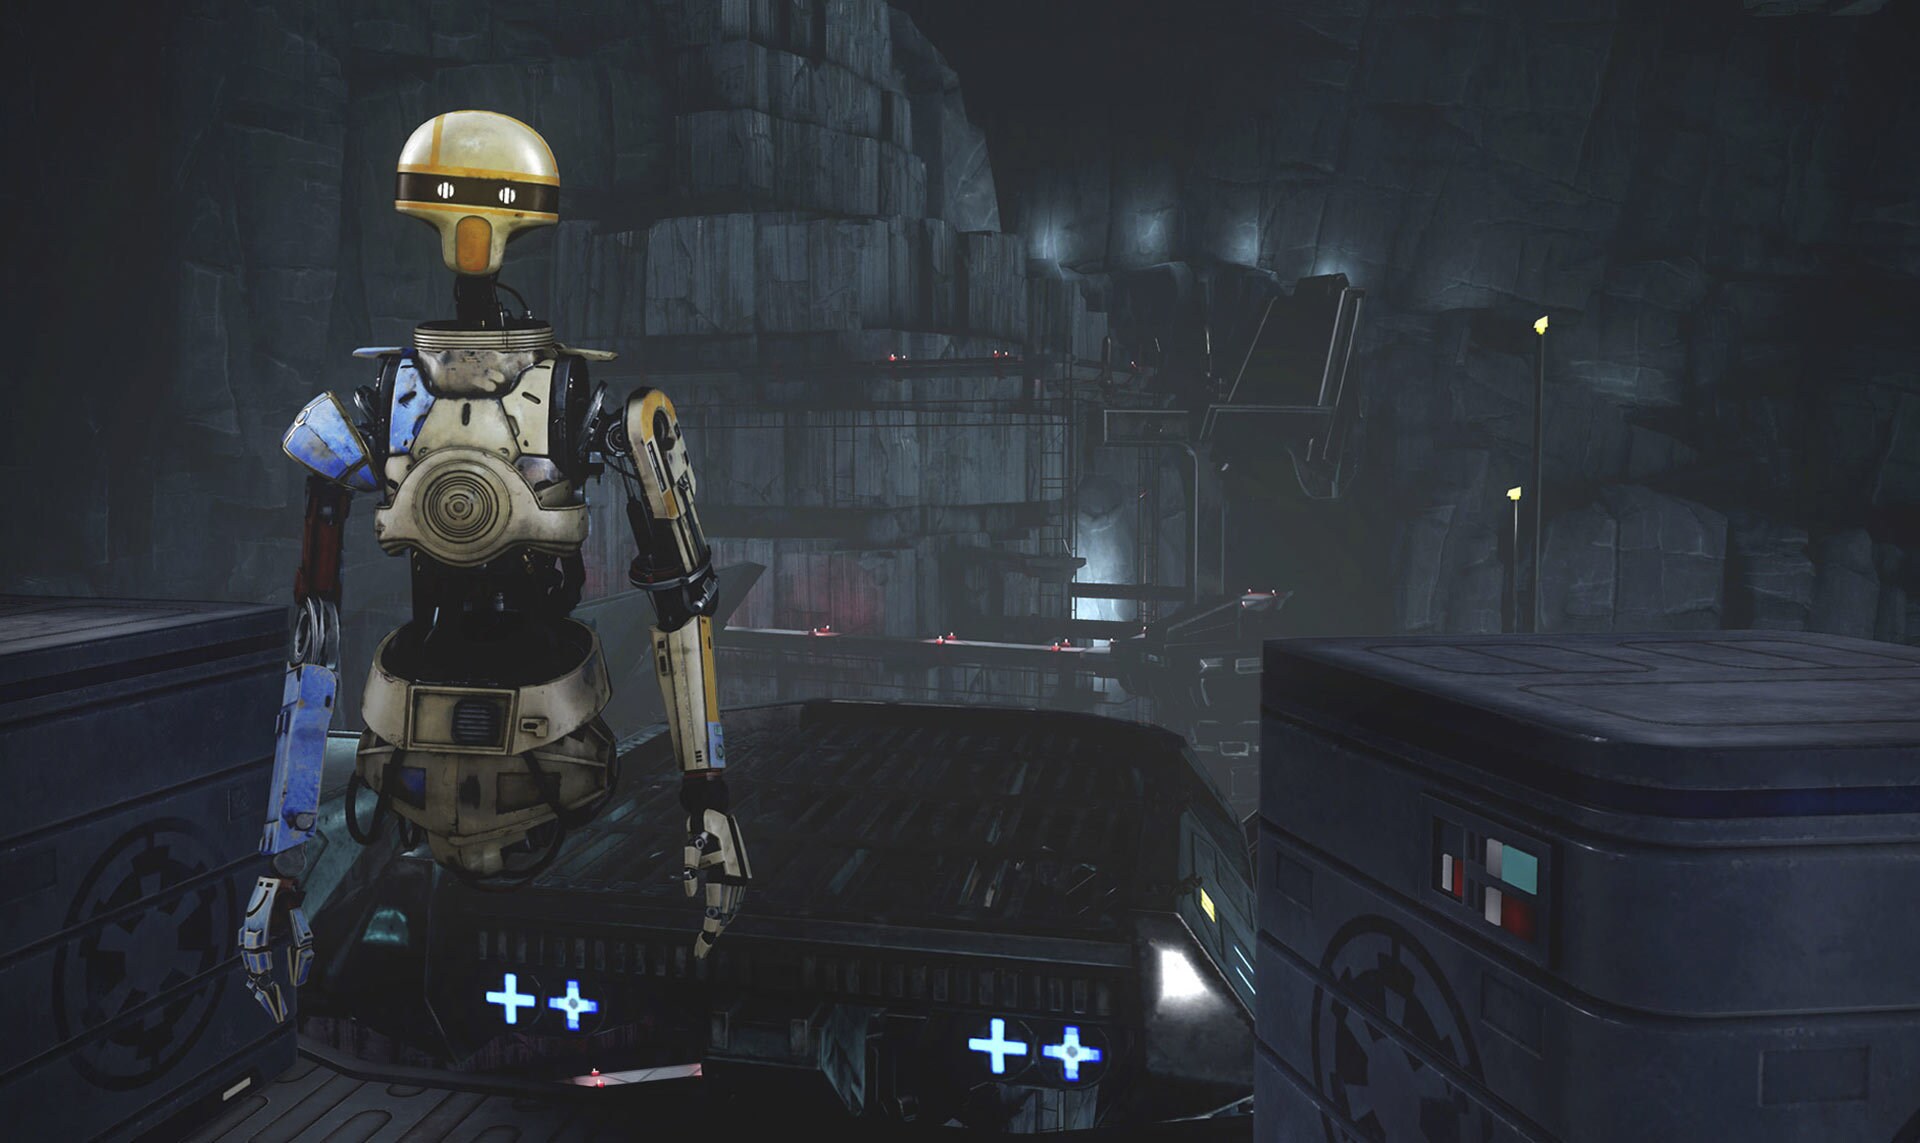 Your companion on this descent into the dark side's greatest mysteries is ZO-E3, voiced by Maya R...